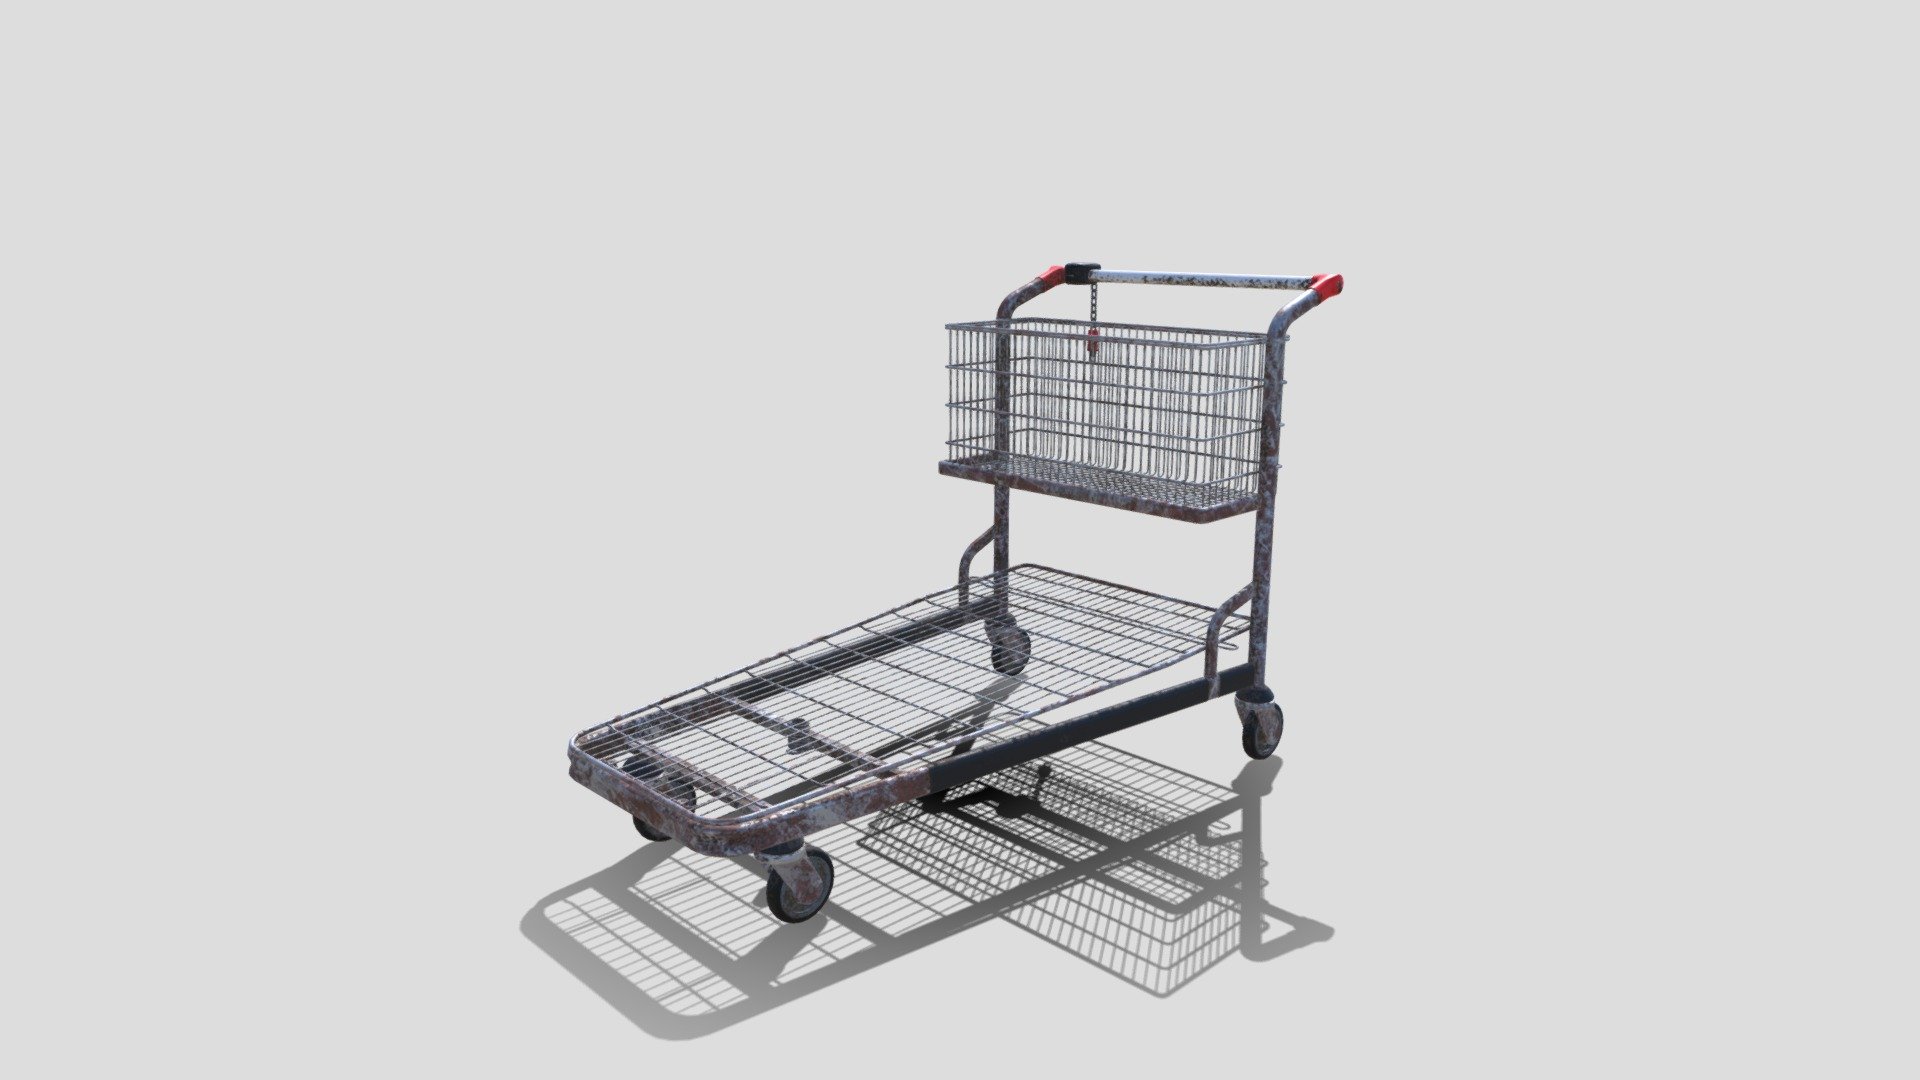 Shopping cart 3d model rendered with Cycles in Blender, as per seen on attached images. 
The model is scaled to real-life scale.

File formats:
-.blend, rendered with cycles, as seen in the images;
-.obj, with materials applied;
-.dae, with materials applied;
-.fbx, with material slots applied;
-.stl;

Files come named appropriately and split by file format.

3D Software:
The 3D model was originally created in Blender 2.8 and rendered with Cycles.

Materials and textures:
PBR material is being used, consisting of five 4k image textures (Base/Disp/Metallic/Normal/Roughness). 
Certain 3d softwares can possibly need texture re-assigning in order to get the proper material effect 3d model